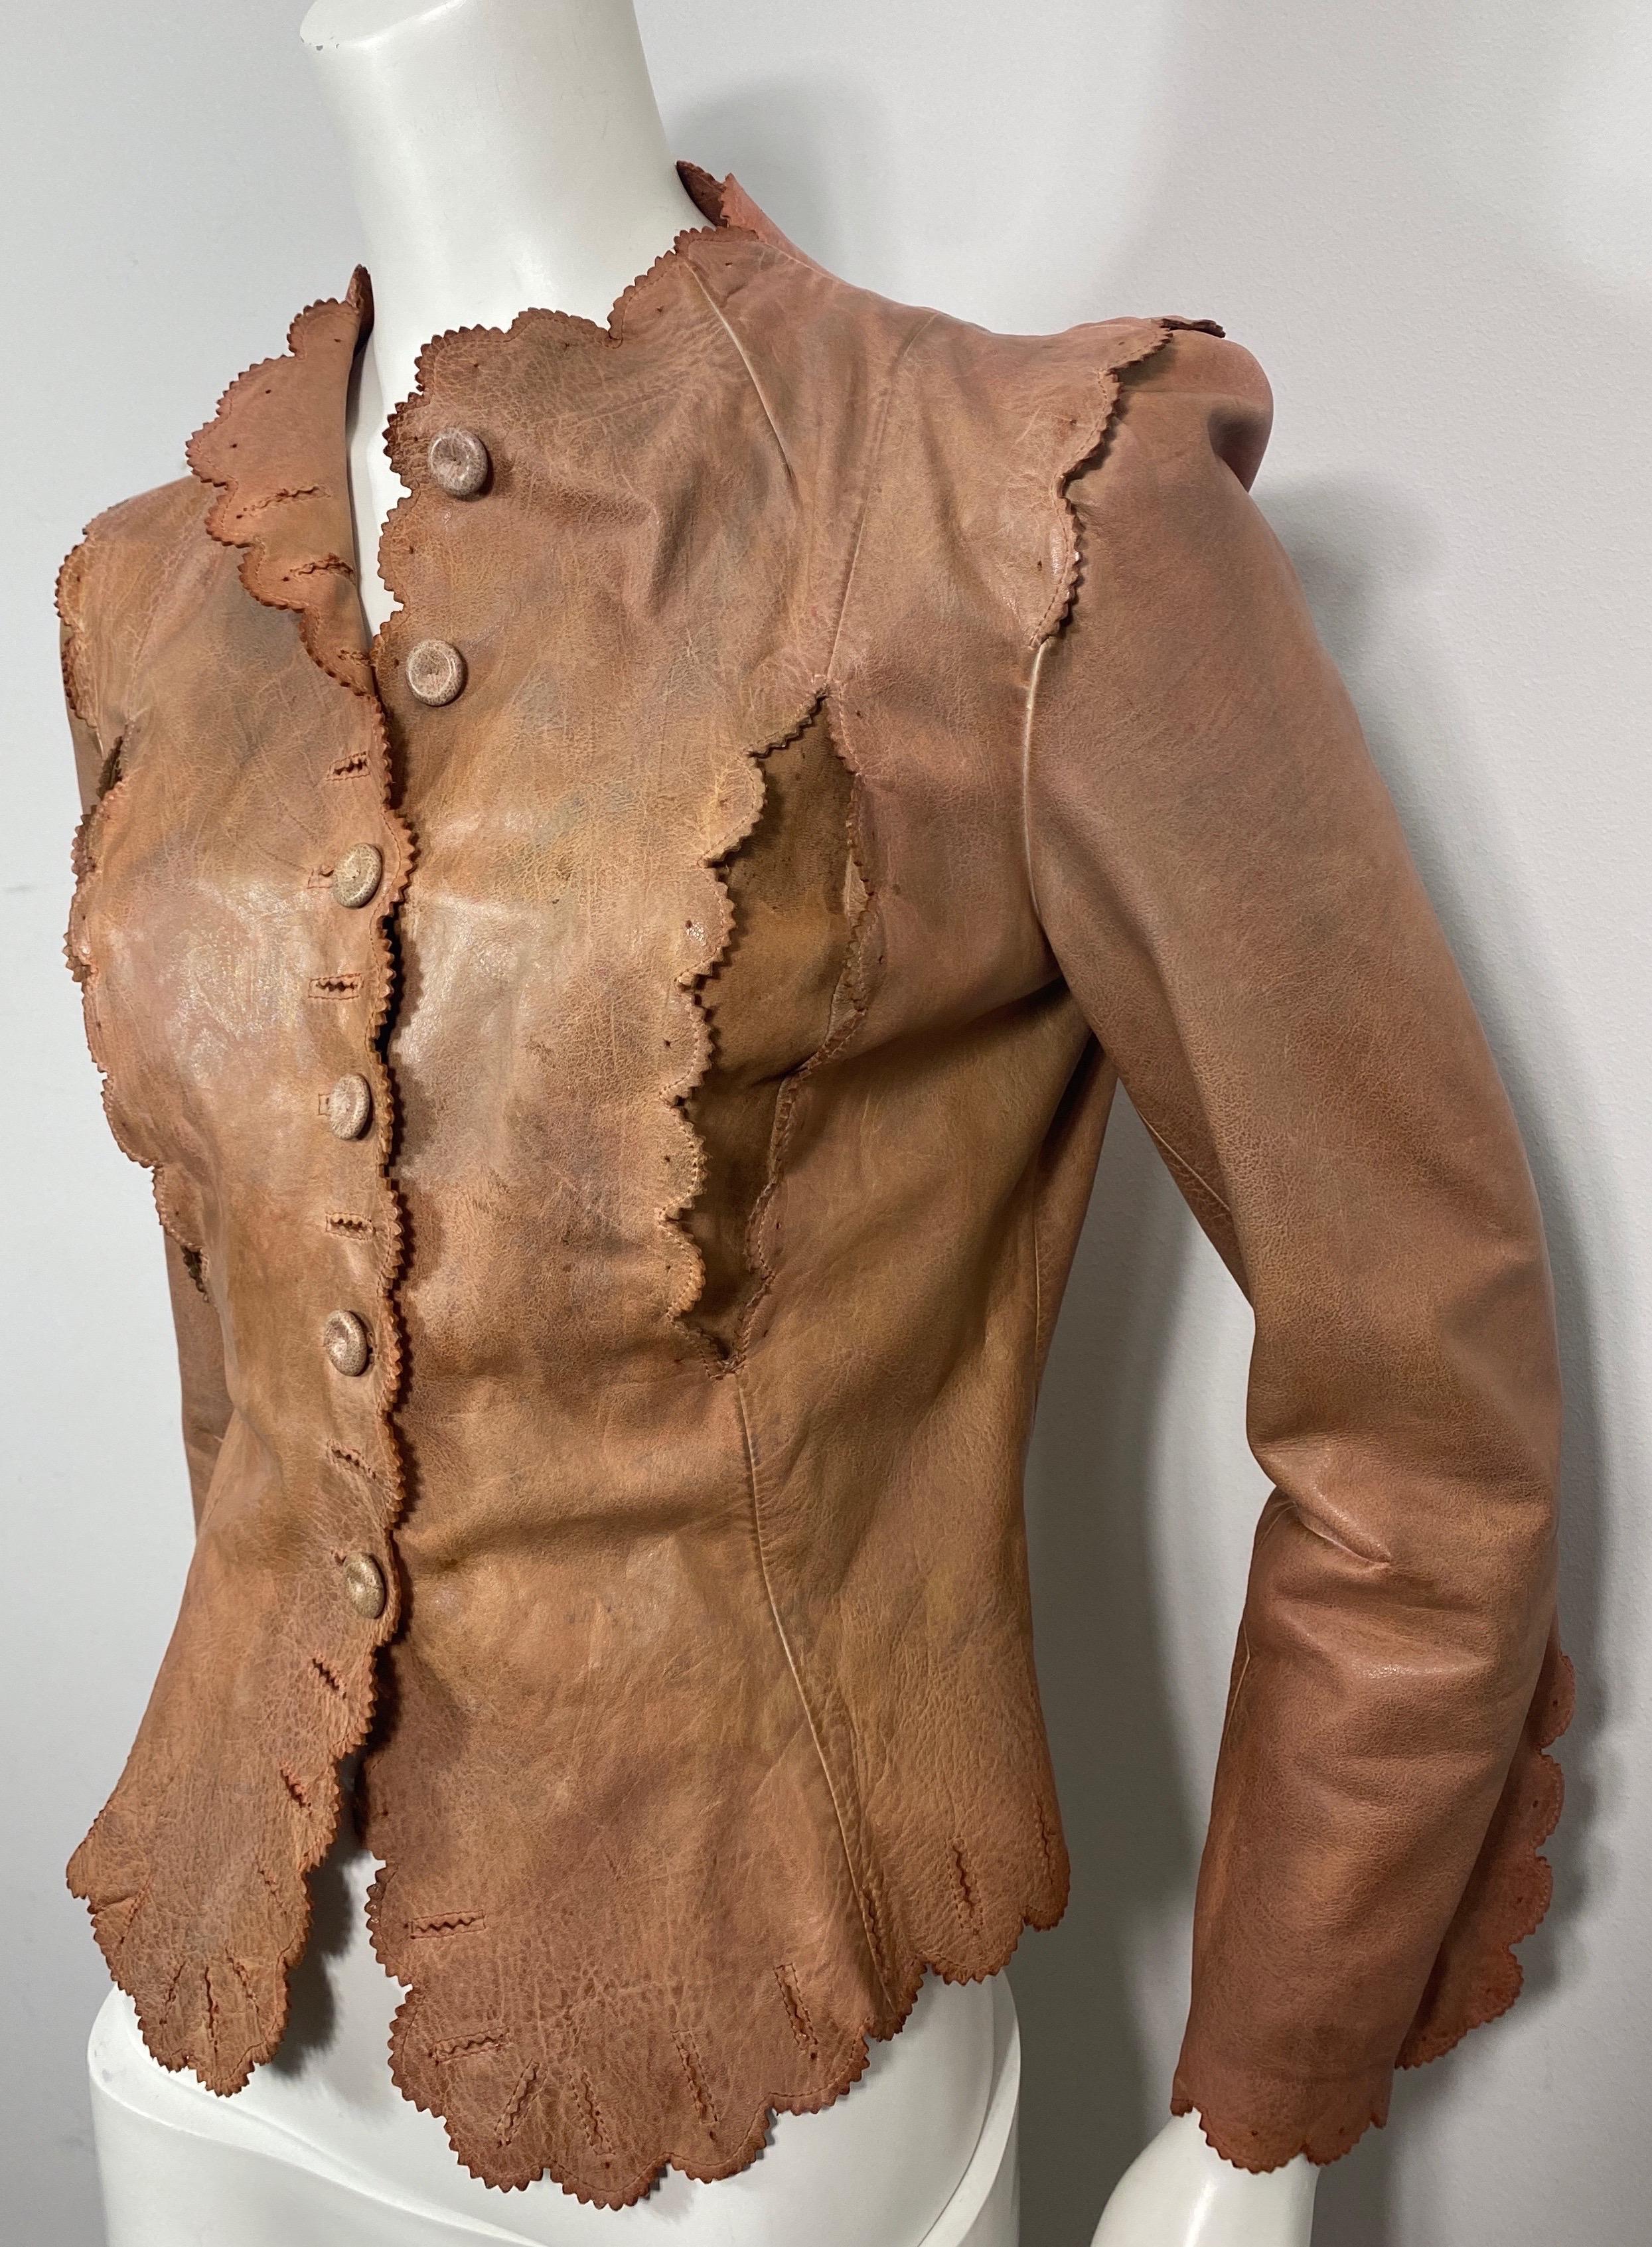 Alexander McQueen Dark Nude Distressed Leather Jacket-Size 40 In Good Condition For Sale In West Palm Beach, FL